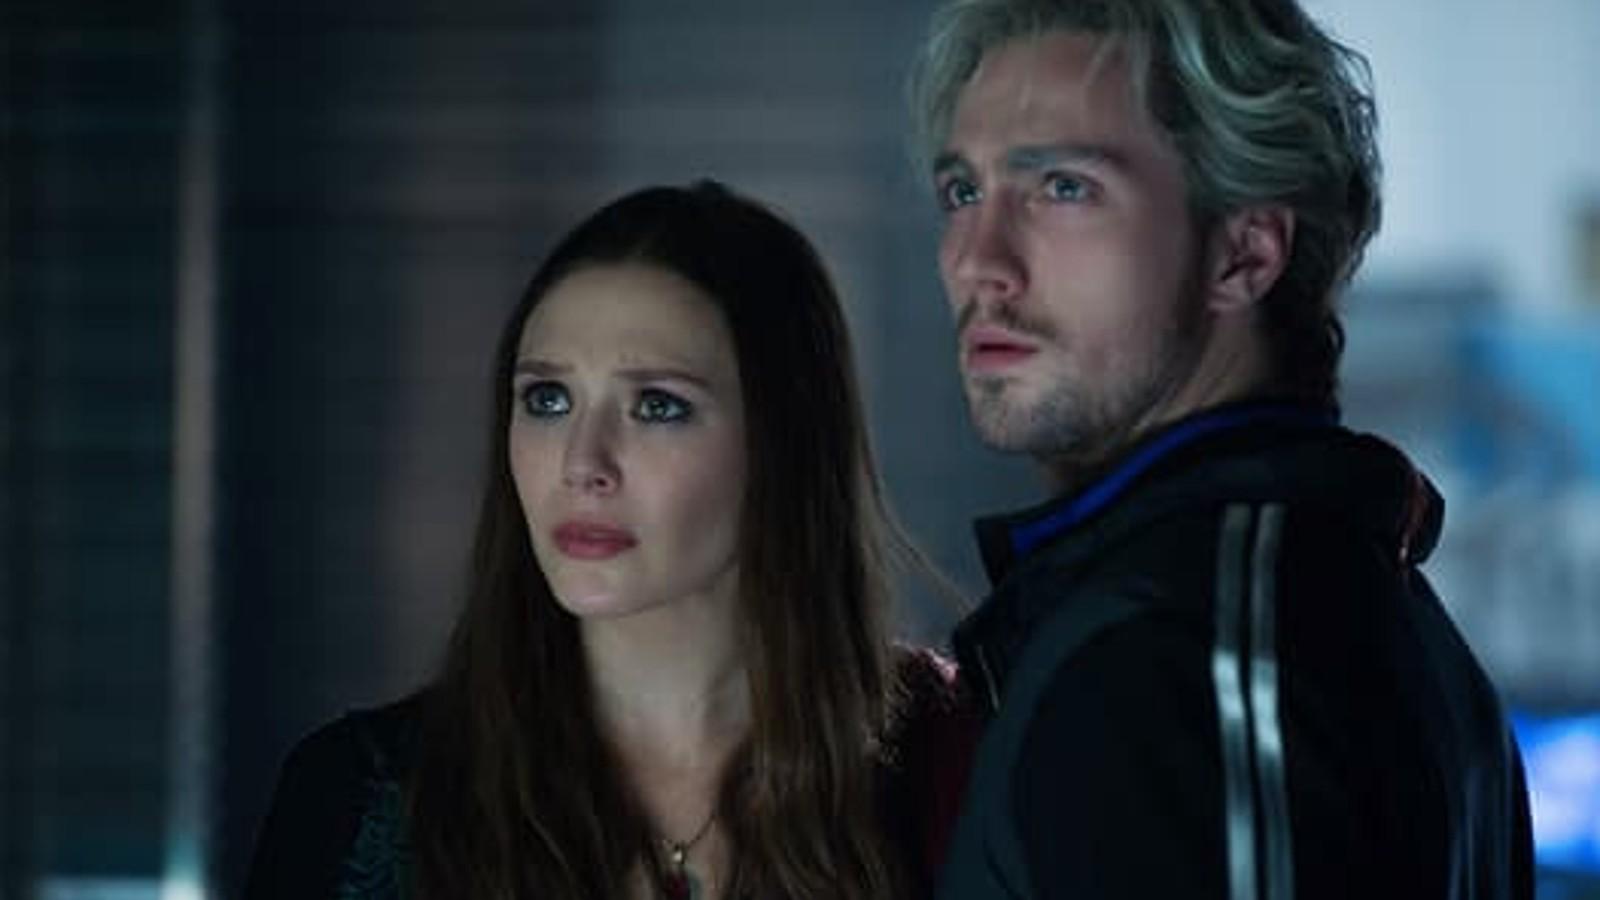 Elizabeth Olsen and Aaron Taylor-Johnson as Wanda and Pierto Maximoff in Avengers: Age of Ultron